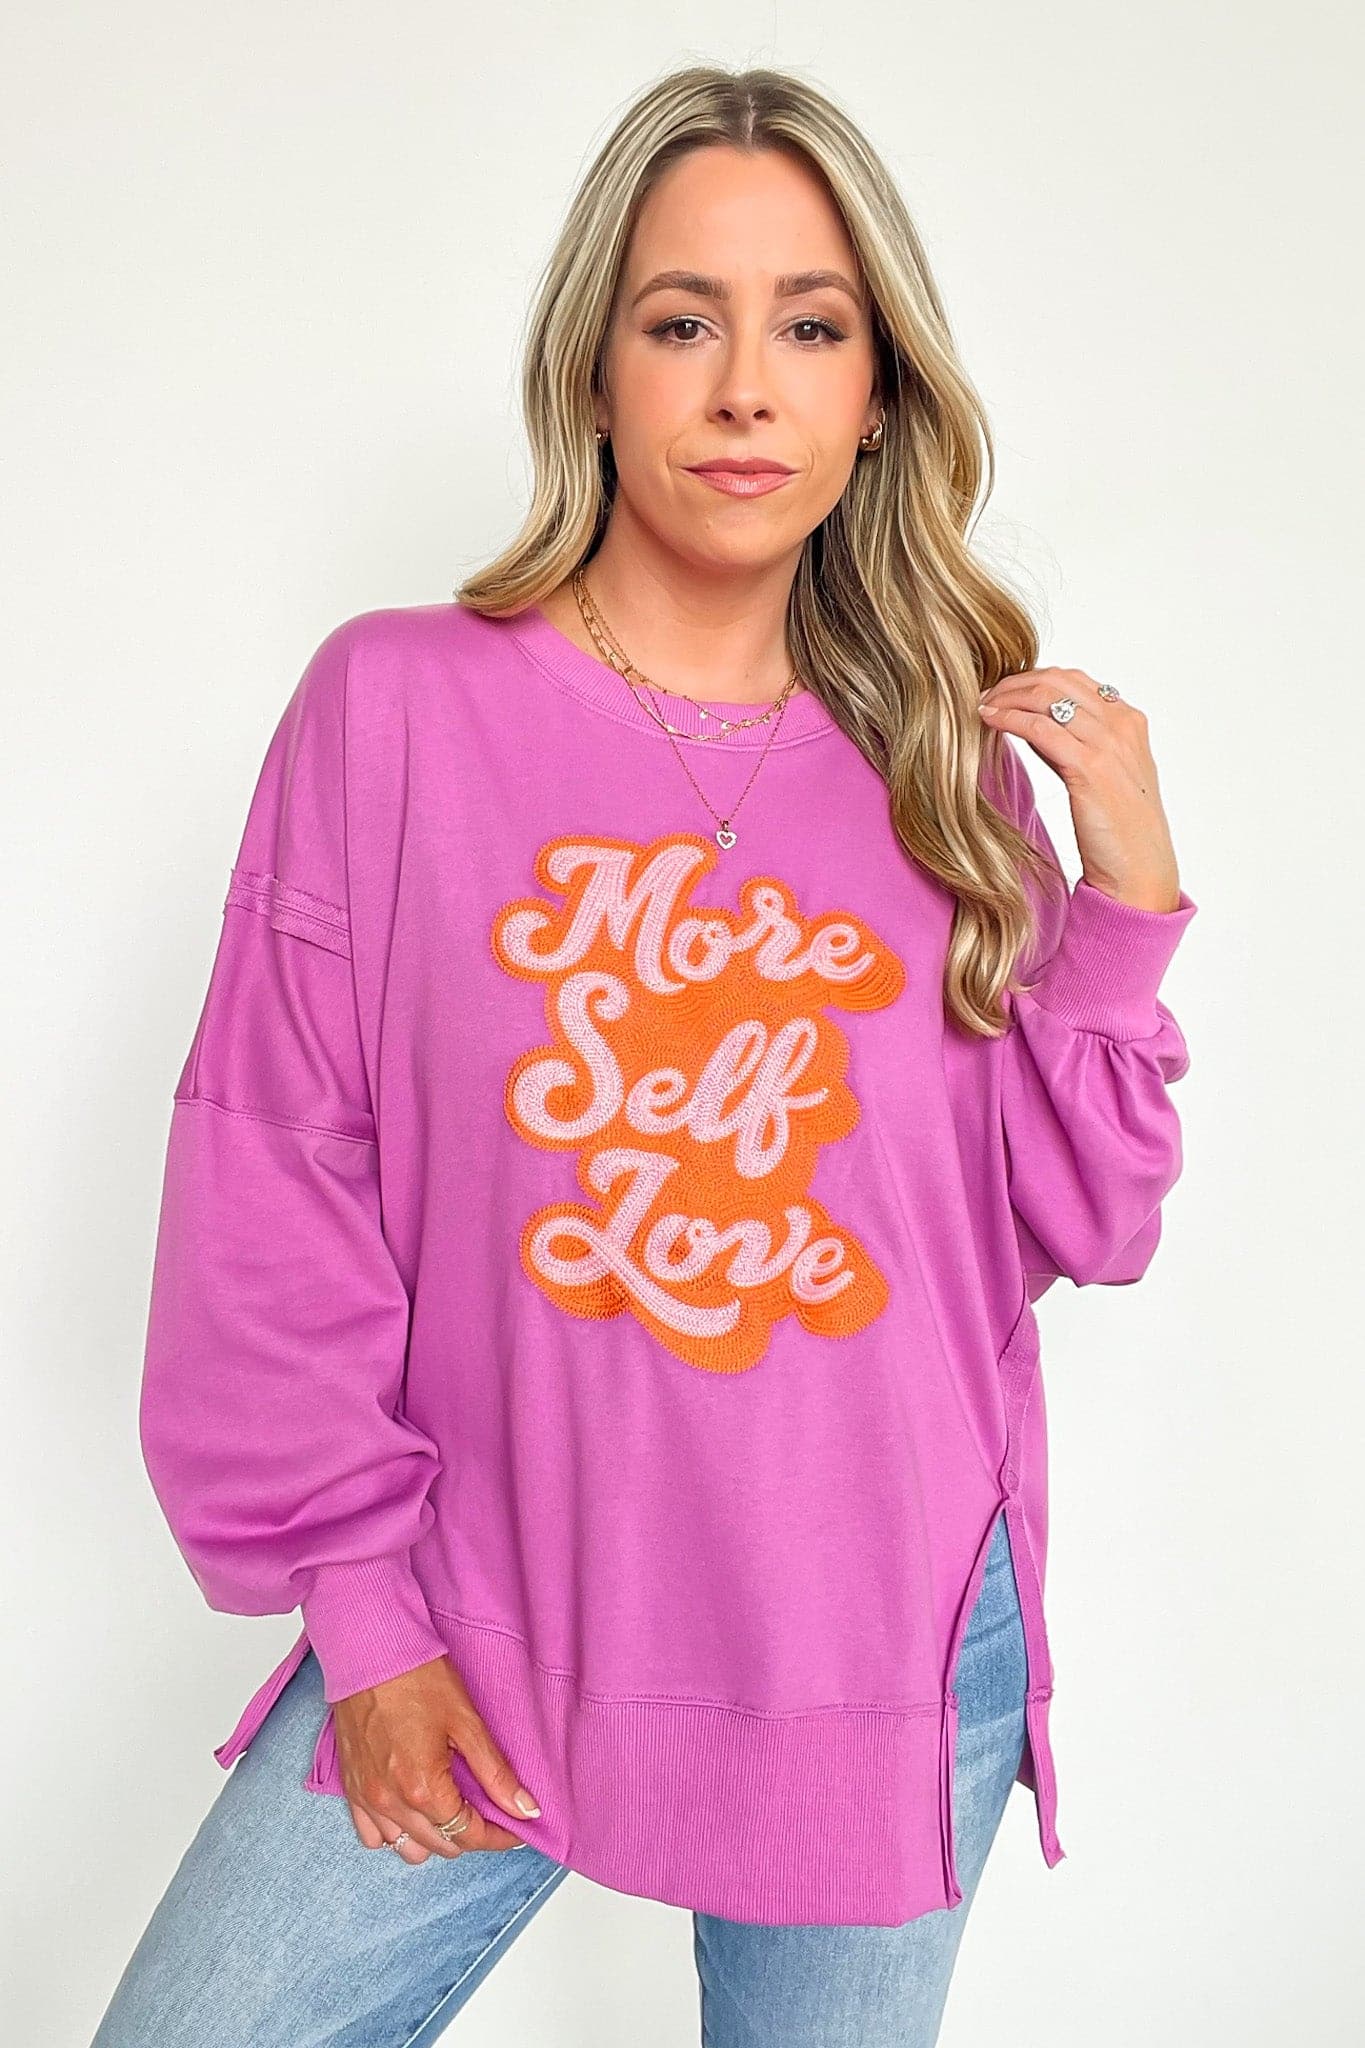  More Self Love Oversized Graphic Embroidered Pullover - FINAL SALE - Madison and Mallory